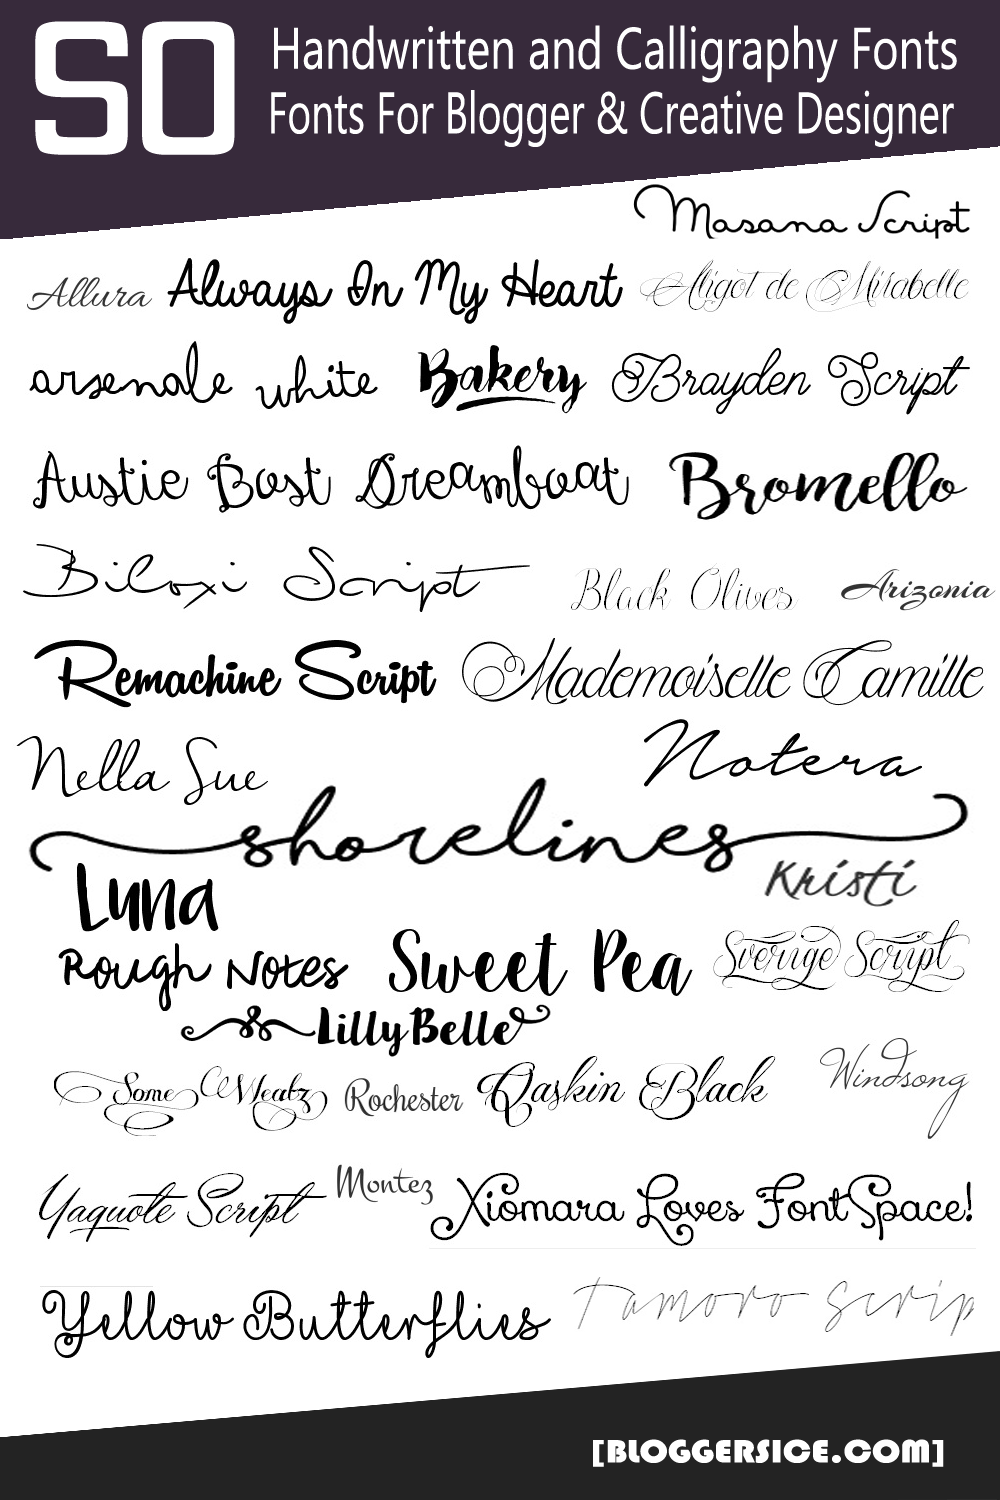 50 Handwritten and Calligraphy Fonts For Blogger and Creative Designer ...